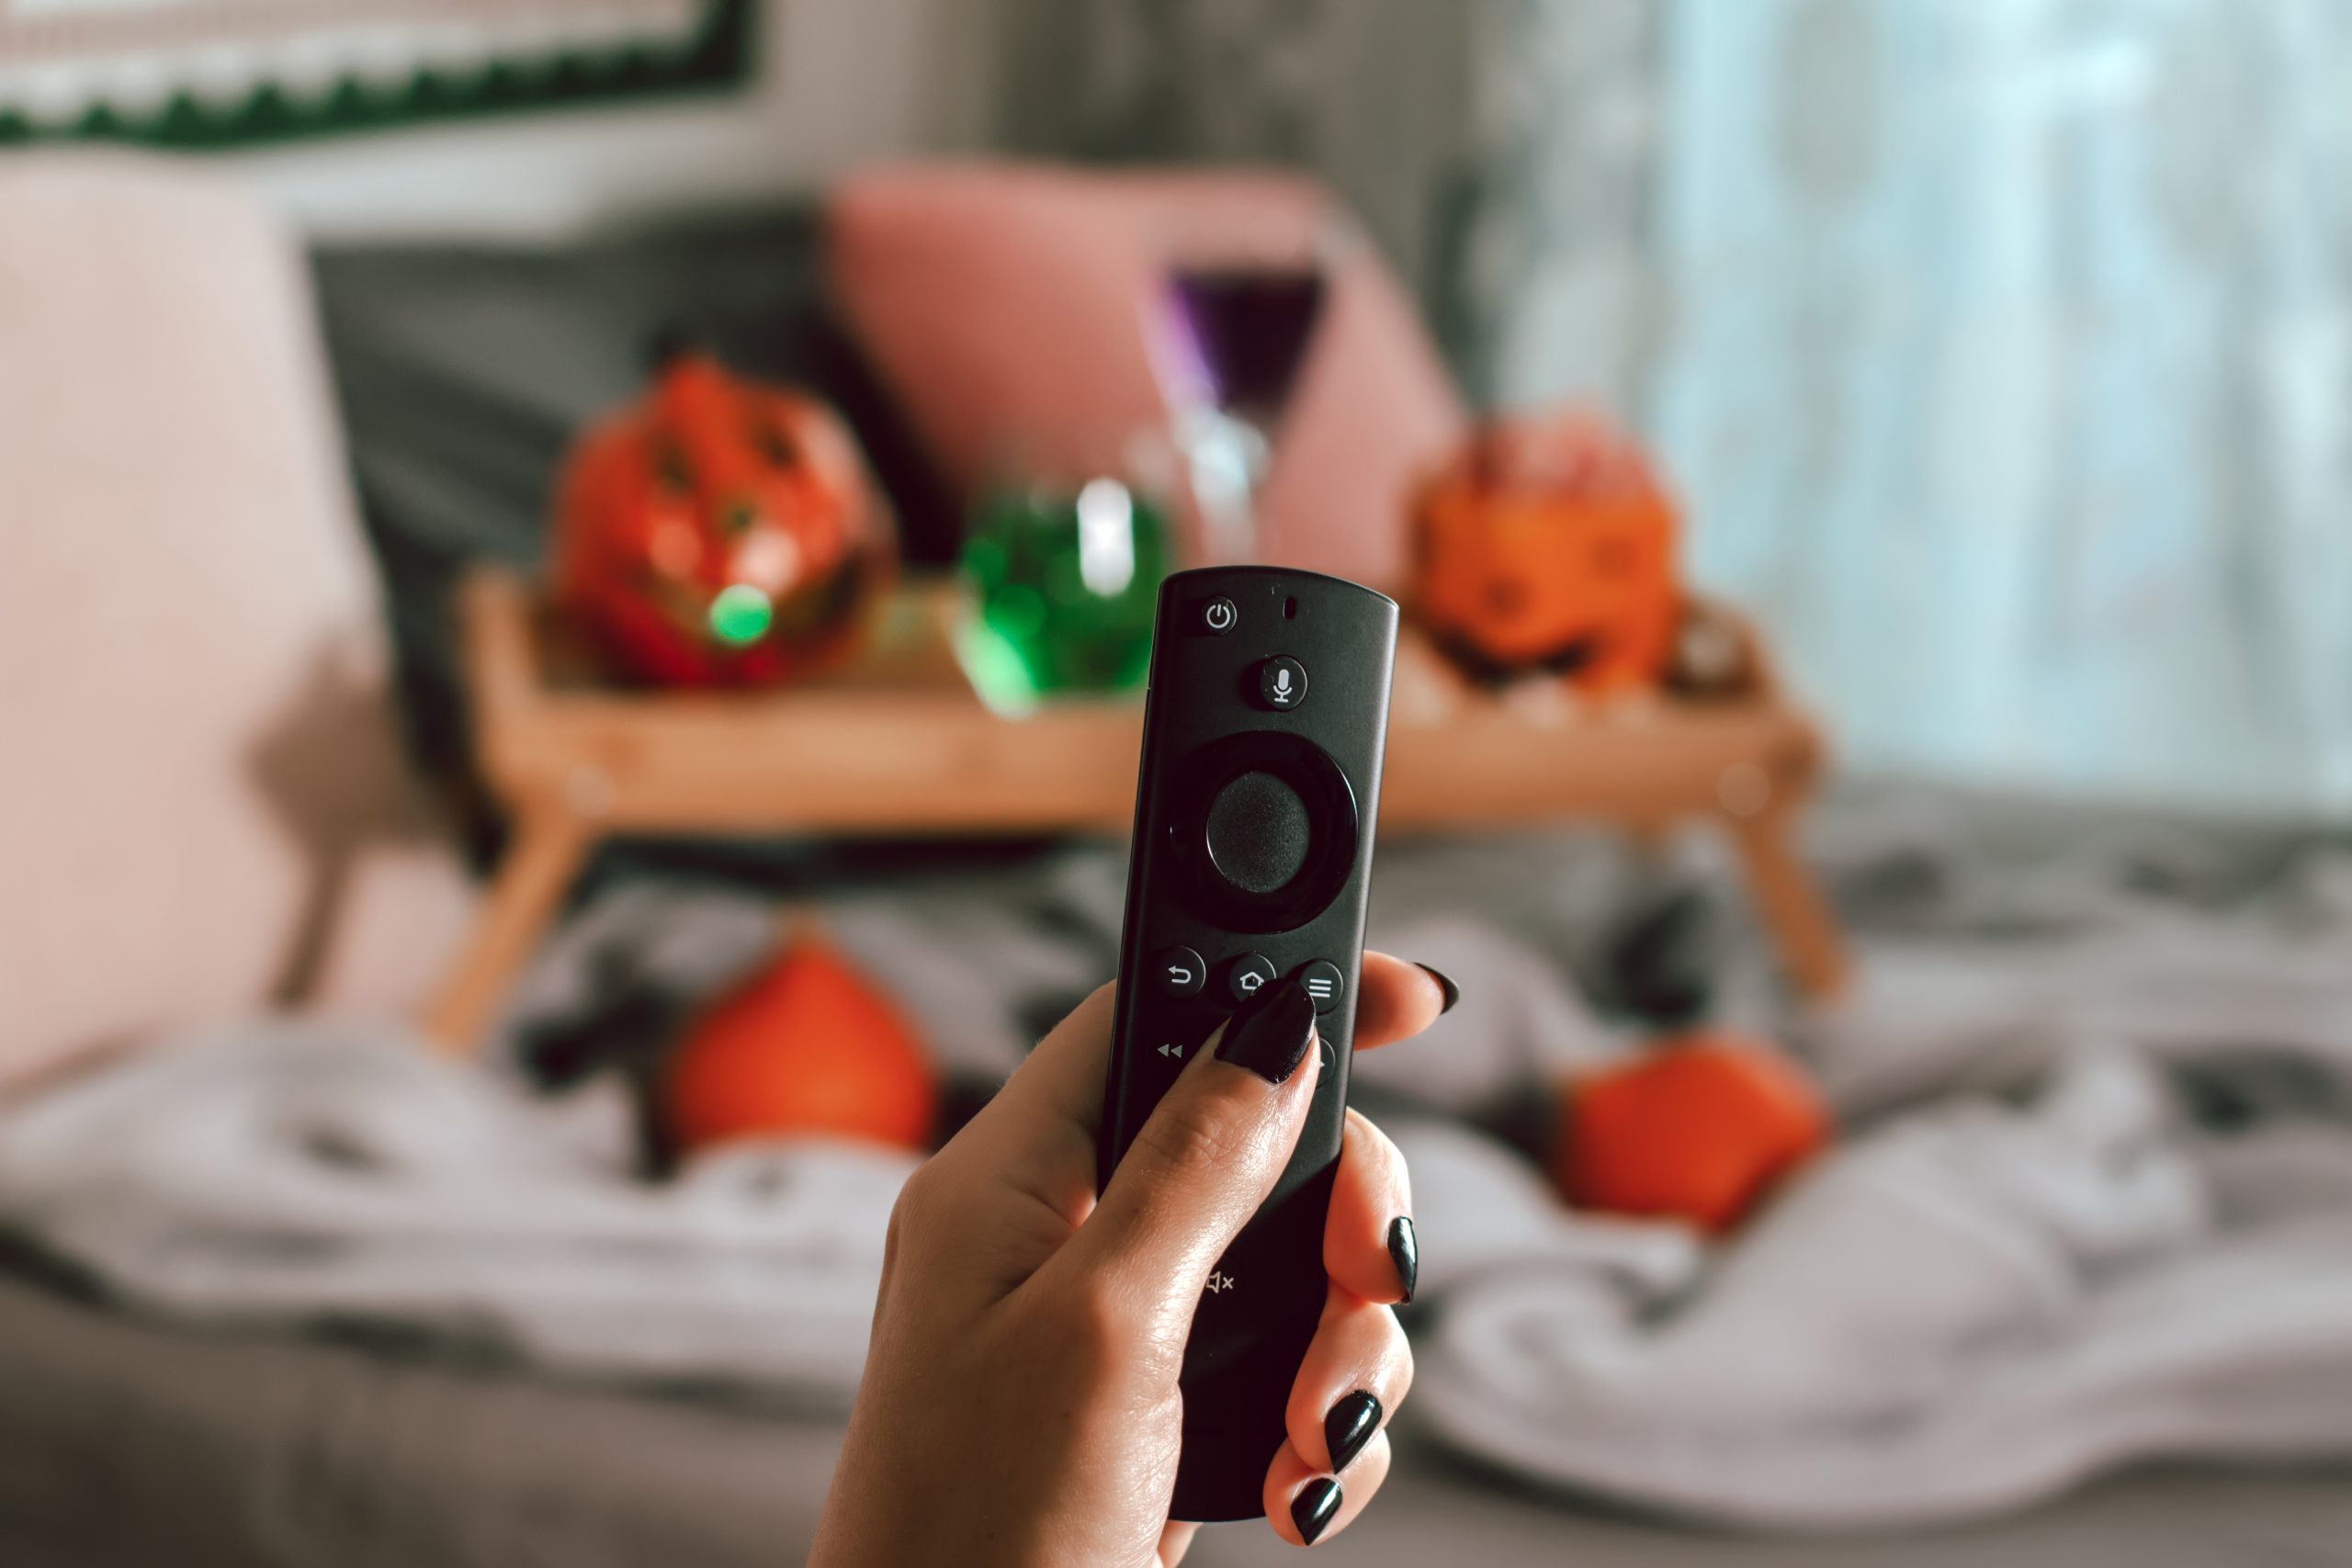 Hand holding a tv remote with a pillow and tray table in the background decorated with Halloween decorations.